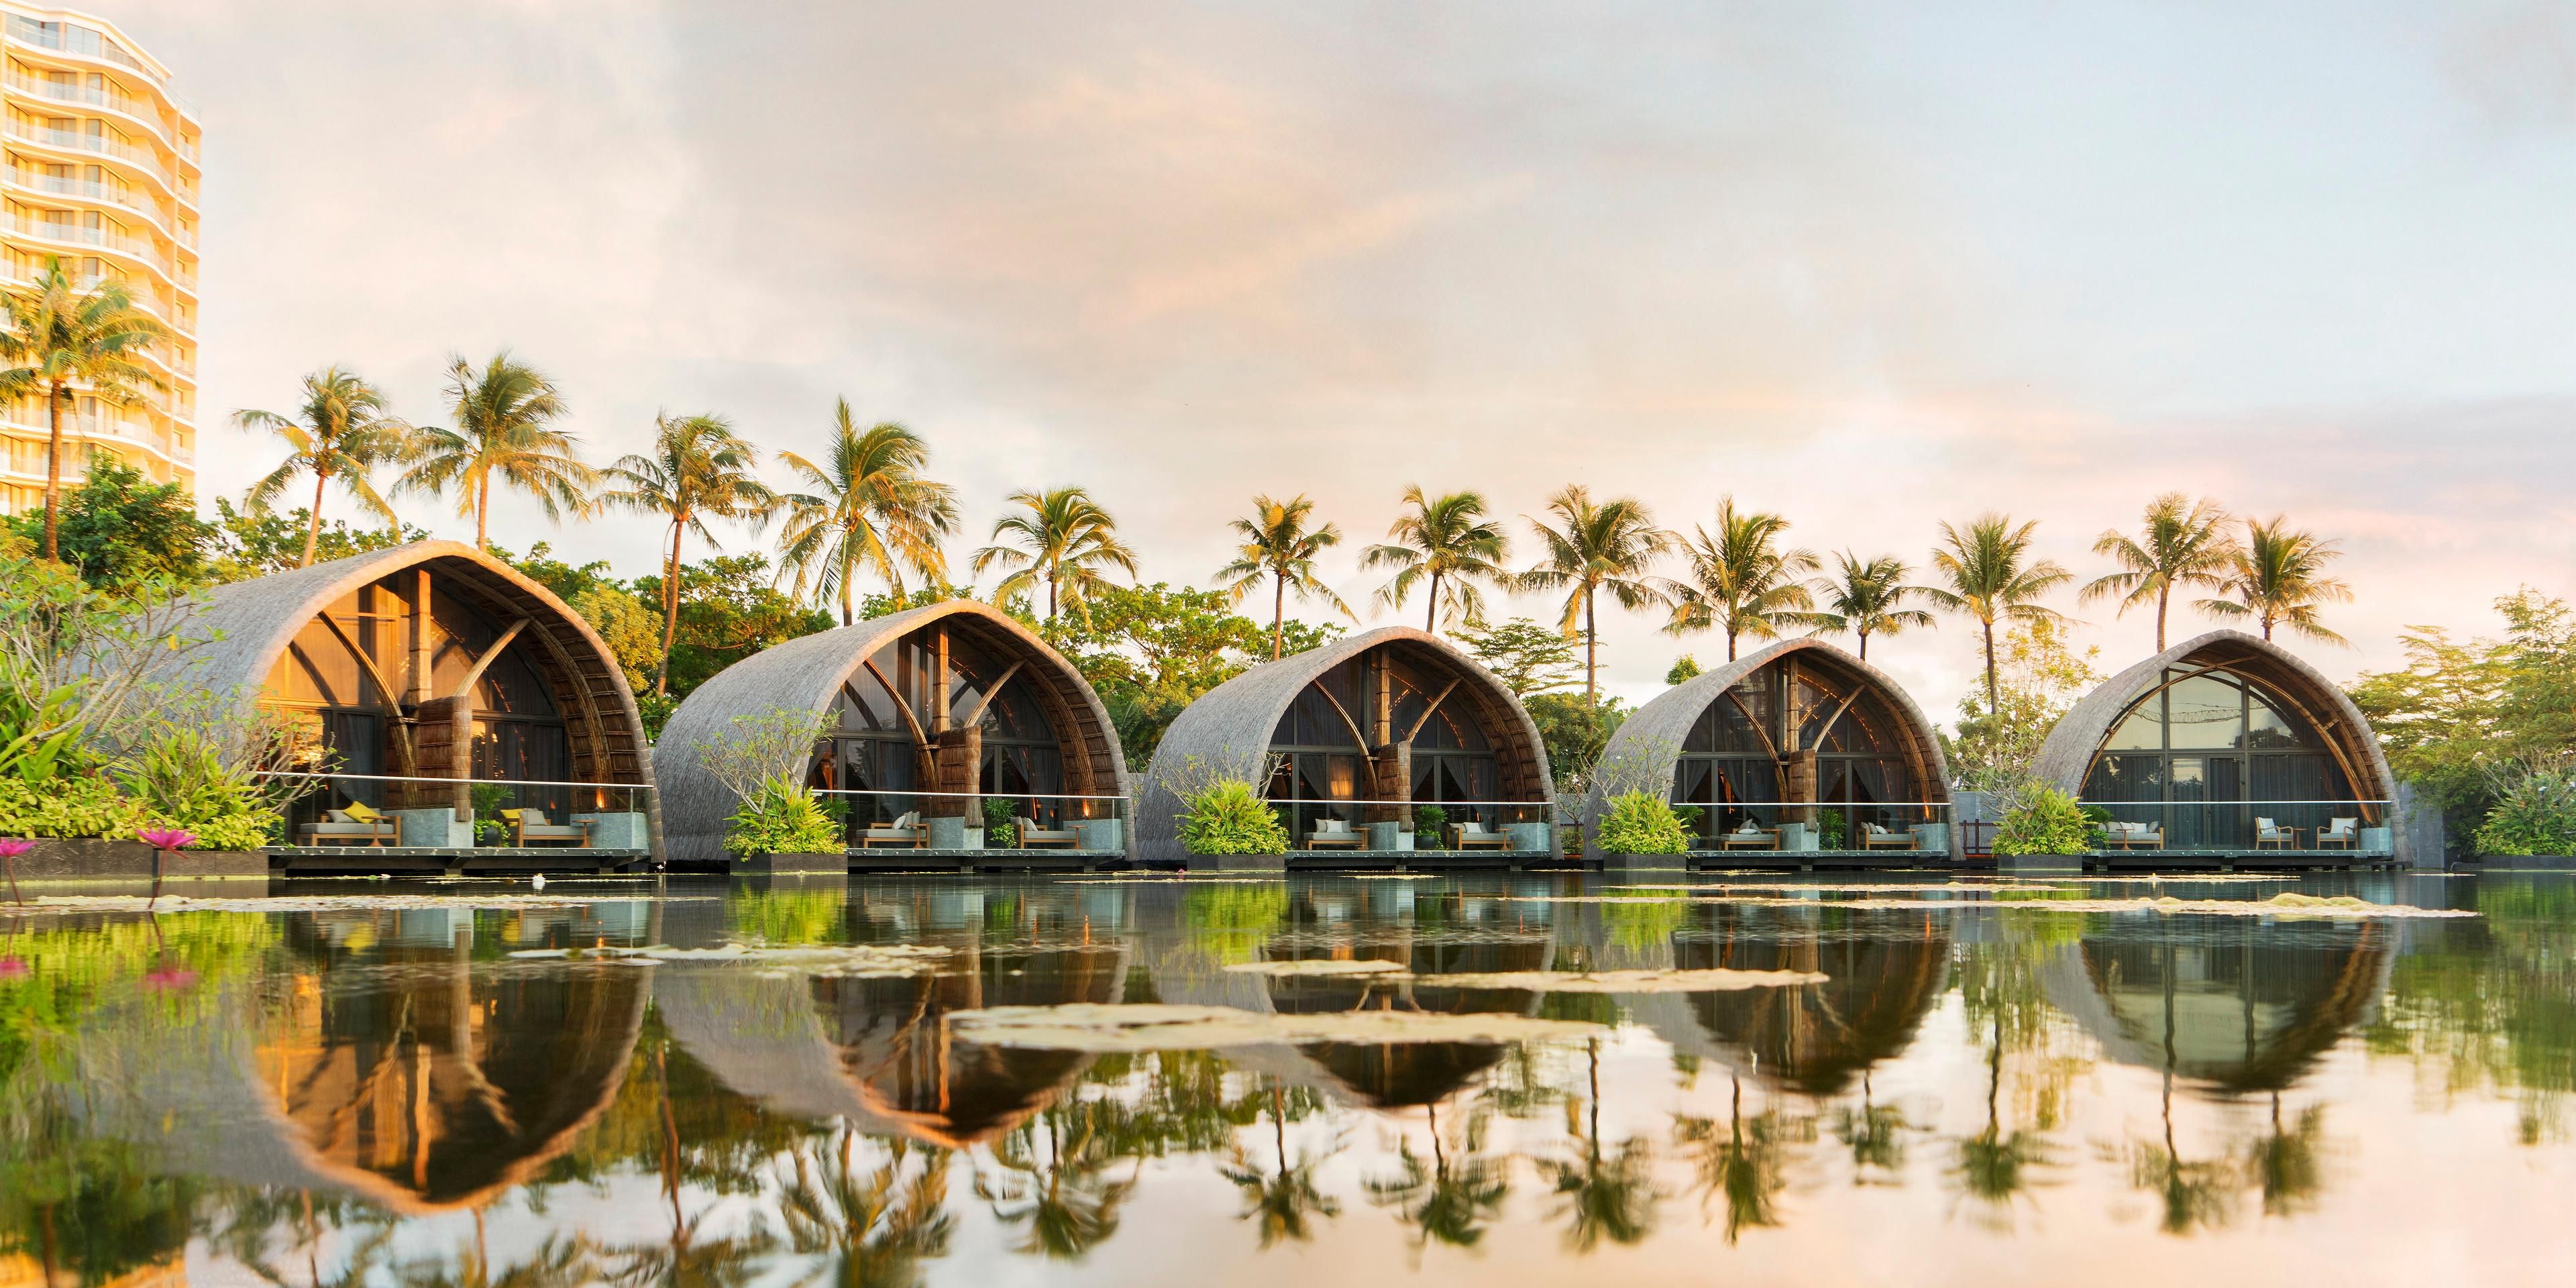 With beautifully appointed treatment suites that appear to float on the lush Lotus Lagoon, HARNN Heritage Spa is a place of natural serenity, offering guests a unique and luxurious wellness experience inspired by the long tradition of Asian healing therapies.